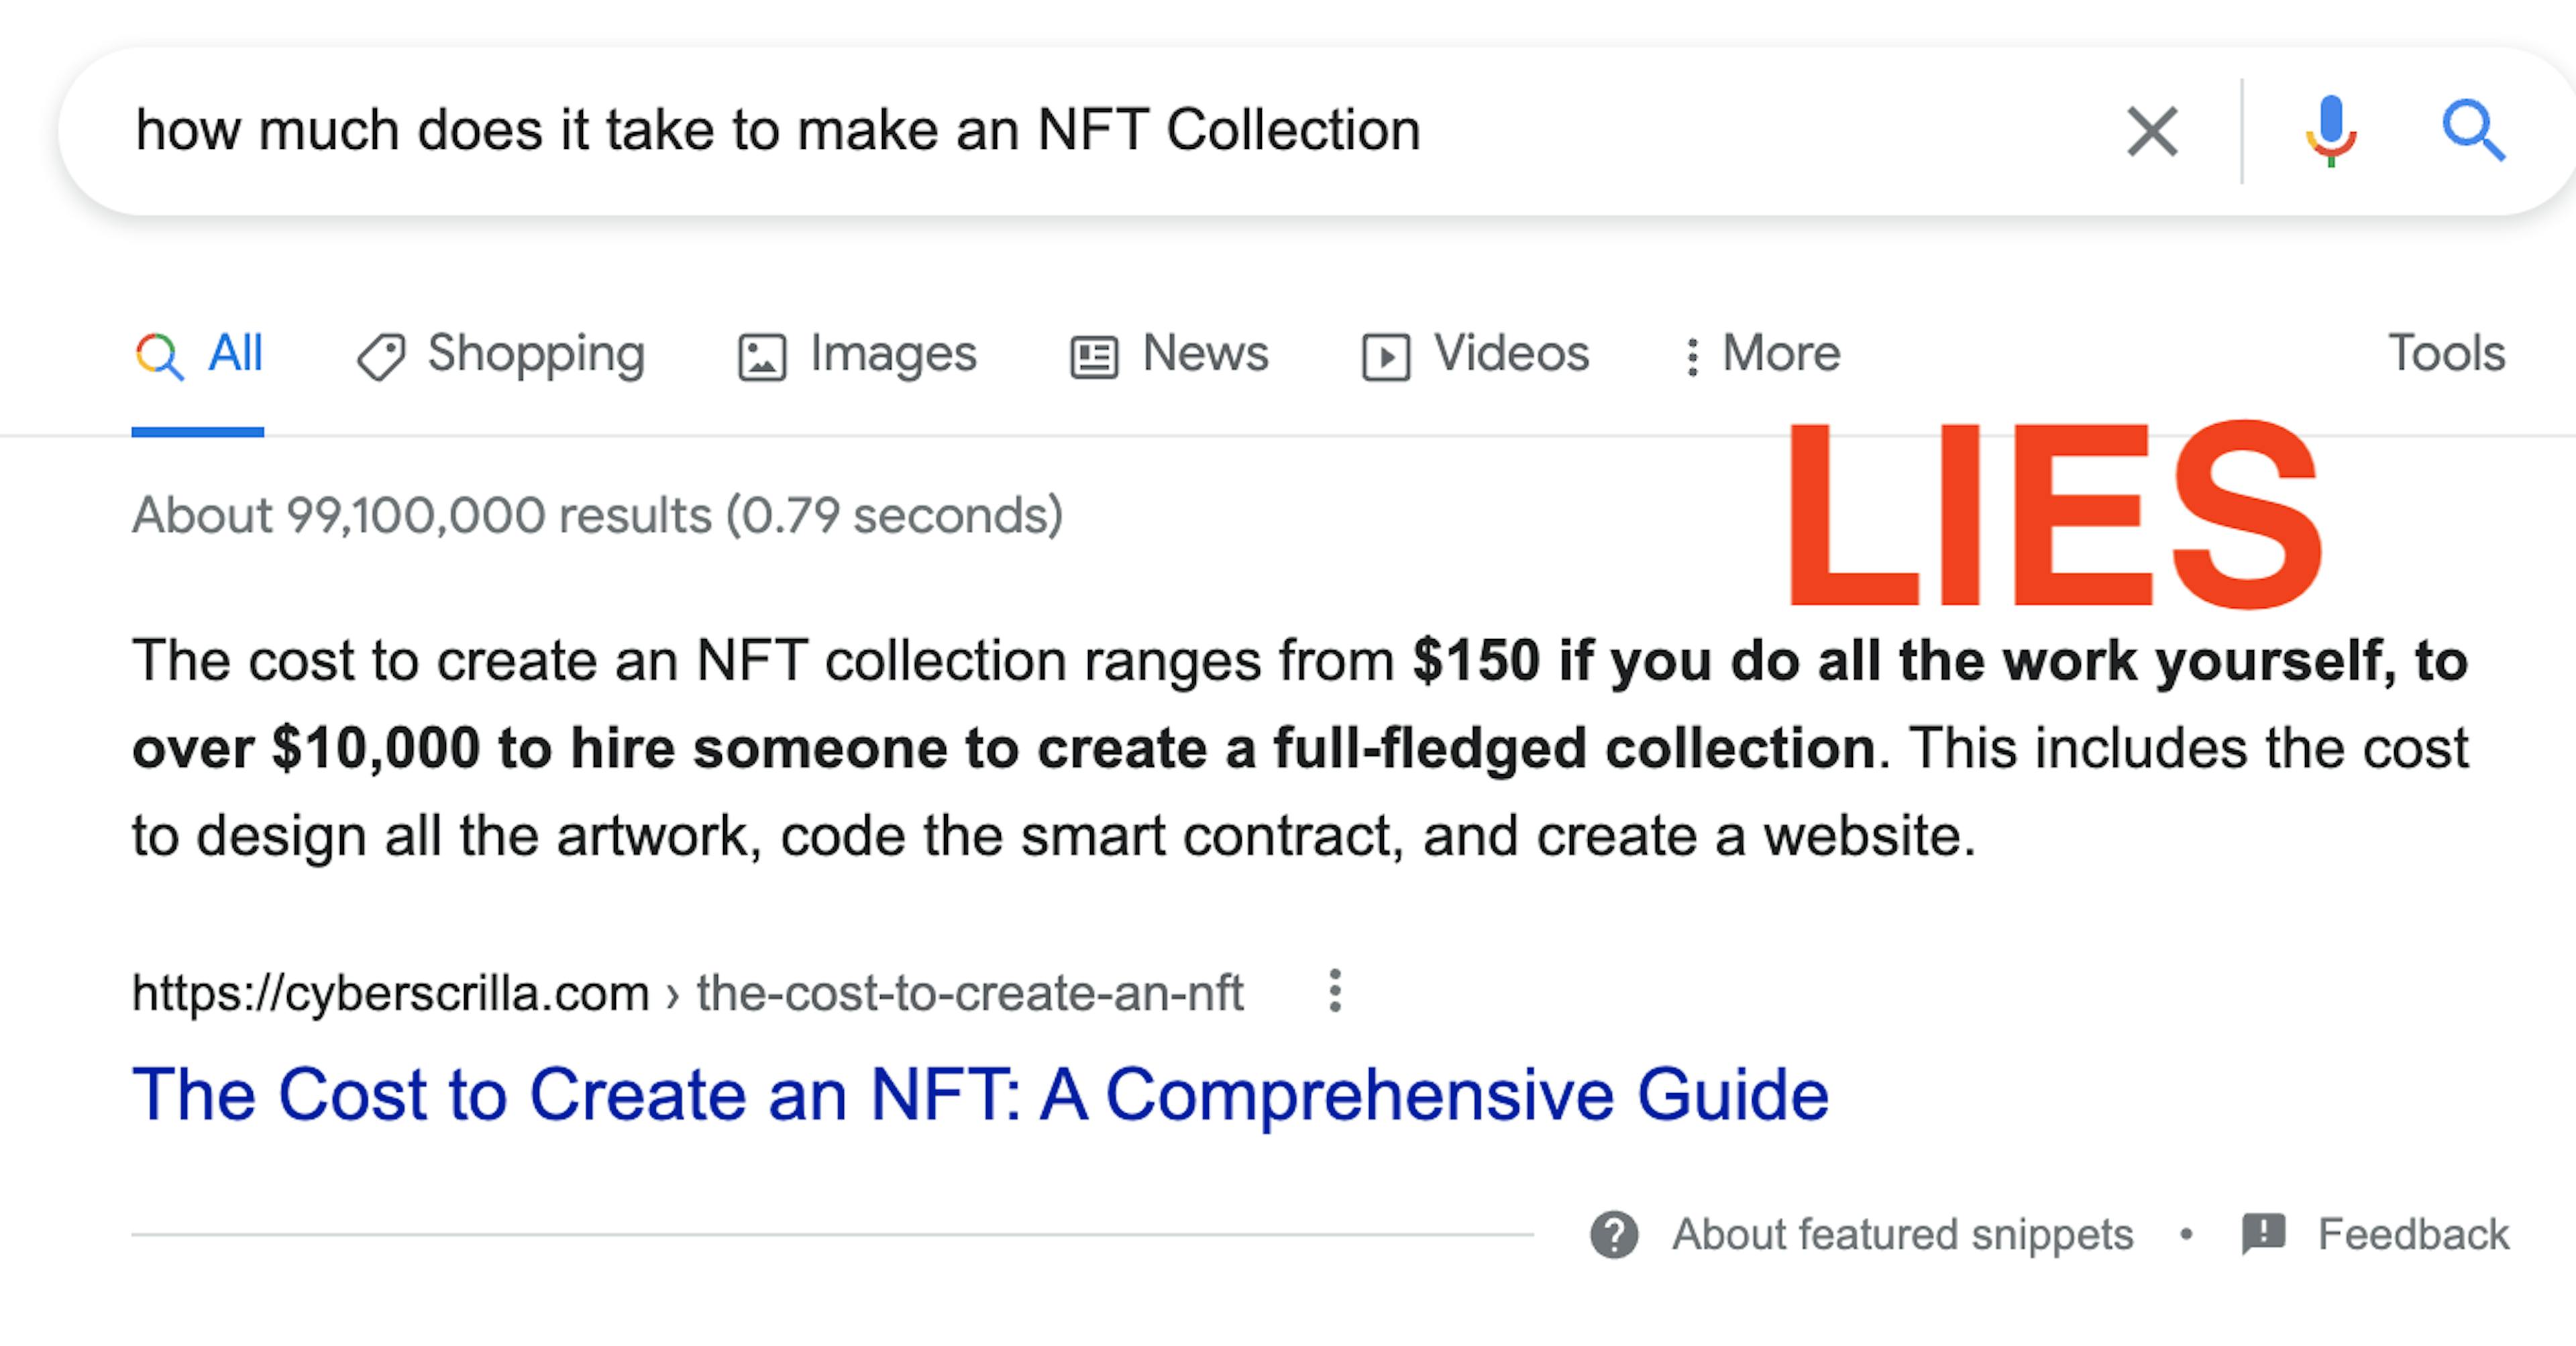 $150 is not enough for a successful NFT collection